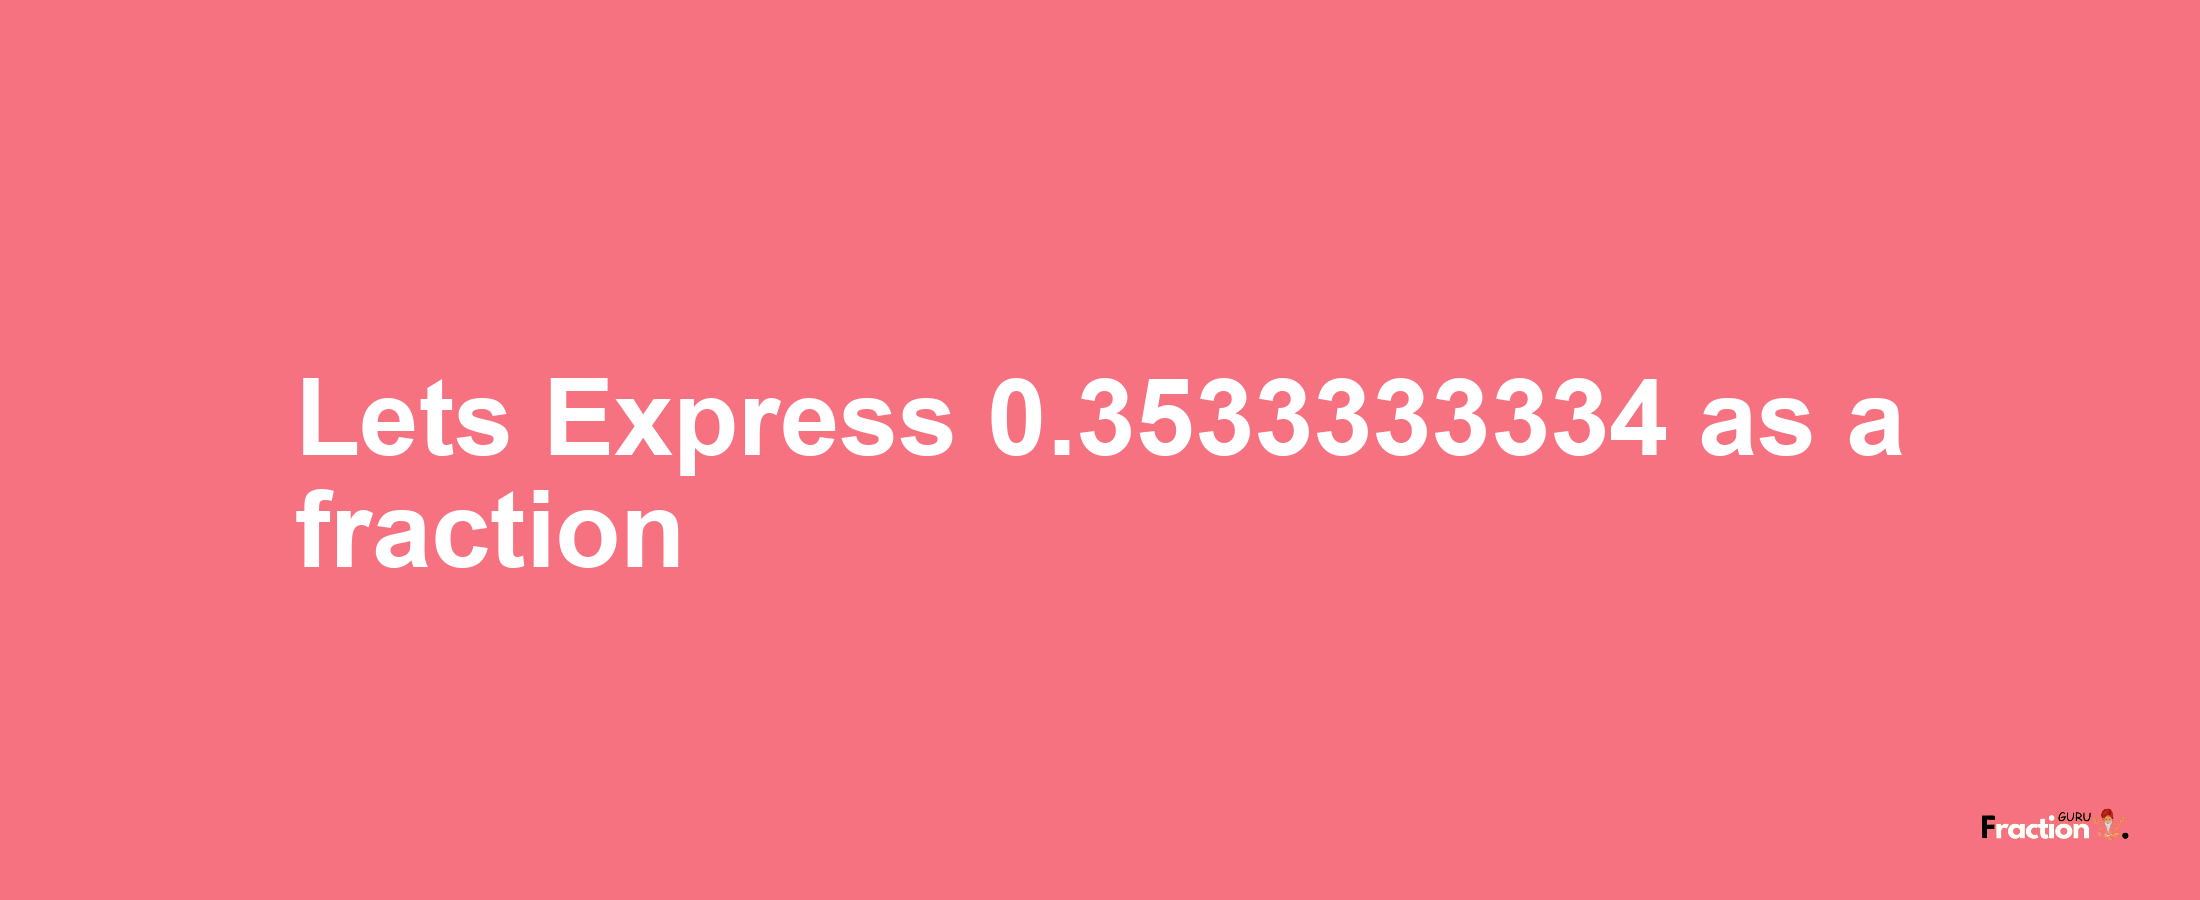 Lets Express 0.3533333334 as afraction